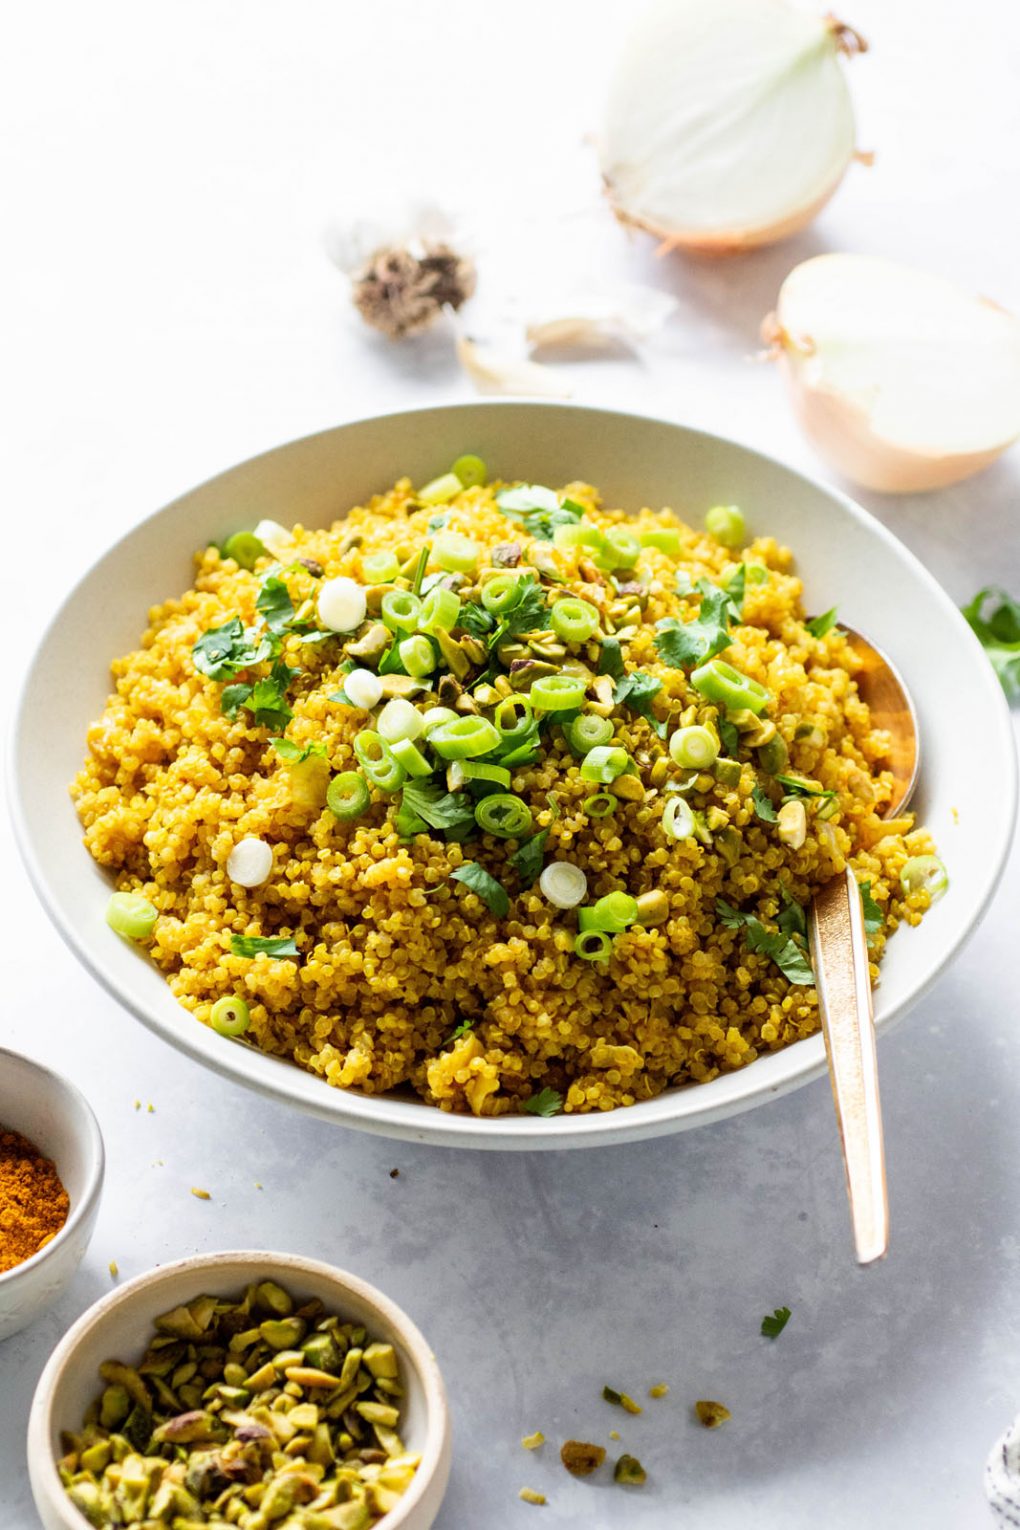 Side angle view of a big white bowl of bright yellow curried quinoa topped with cilantro, green onions, and pistachios. On a light colored background next to a small bowl of pistachios.